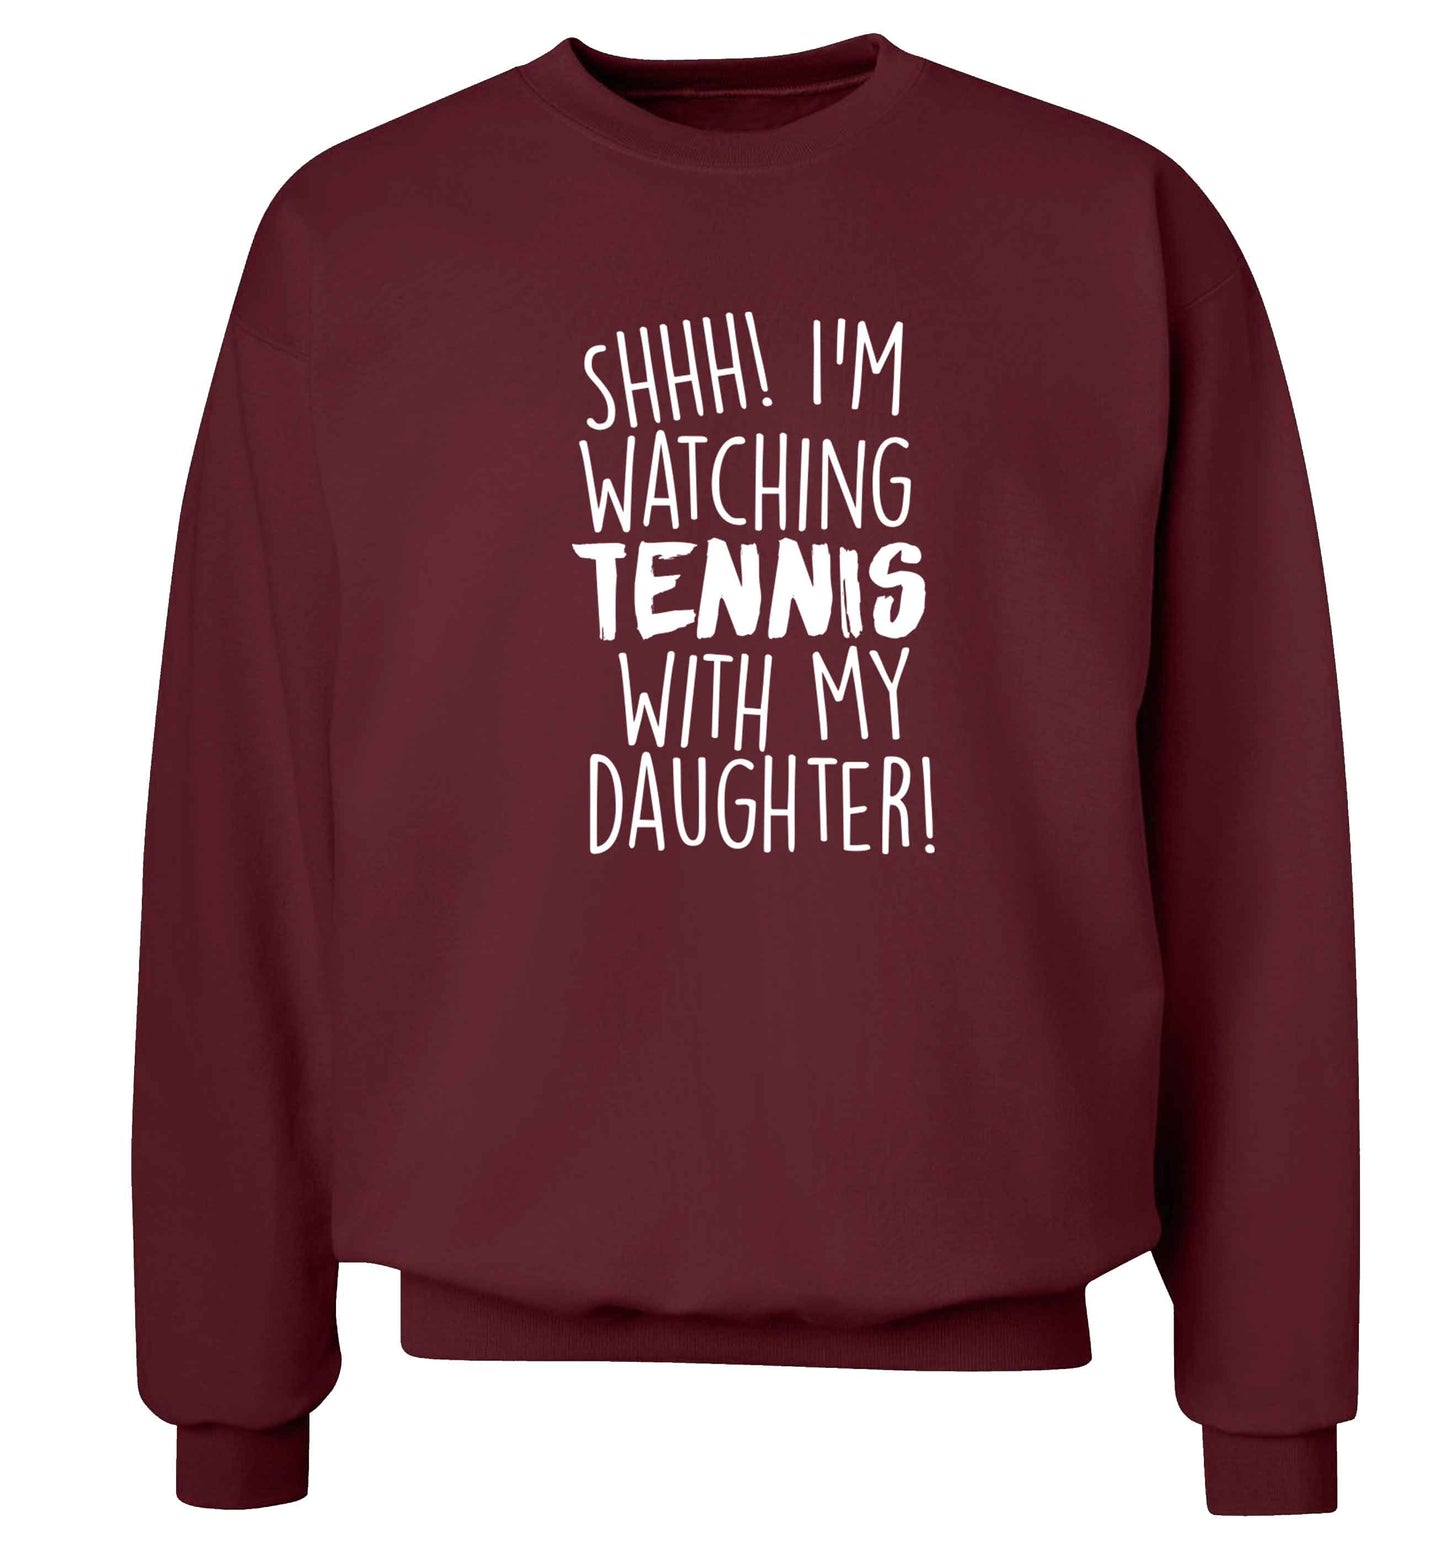 Shh! I'm watching tennis with my daughter! Adult's unisex maroon Sweater 2XL